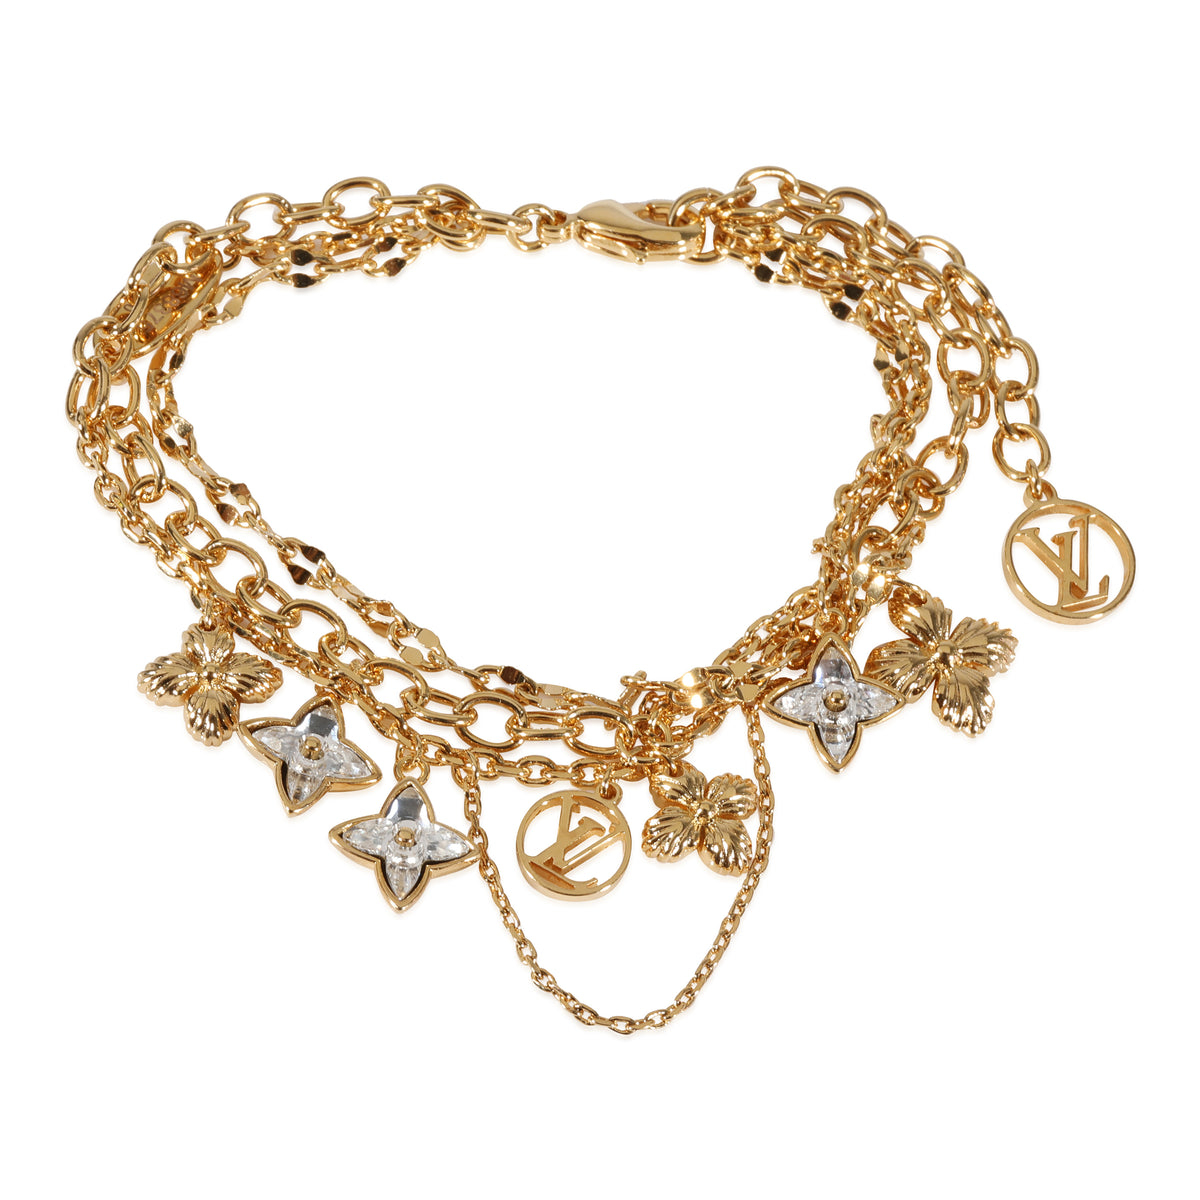 Louis Vuitton Blooming Bracelet in Gold Tone Strass, myGemma